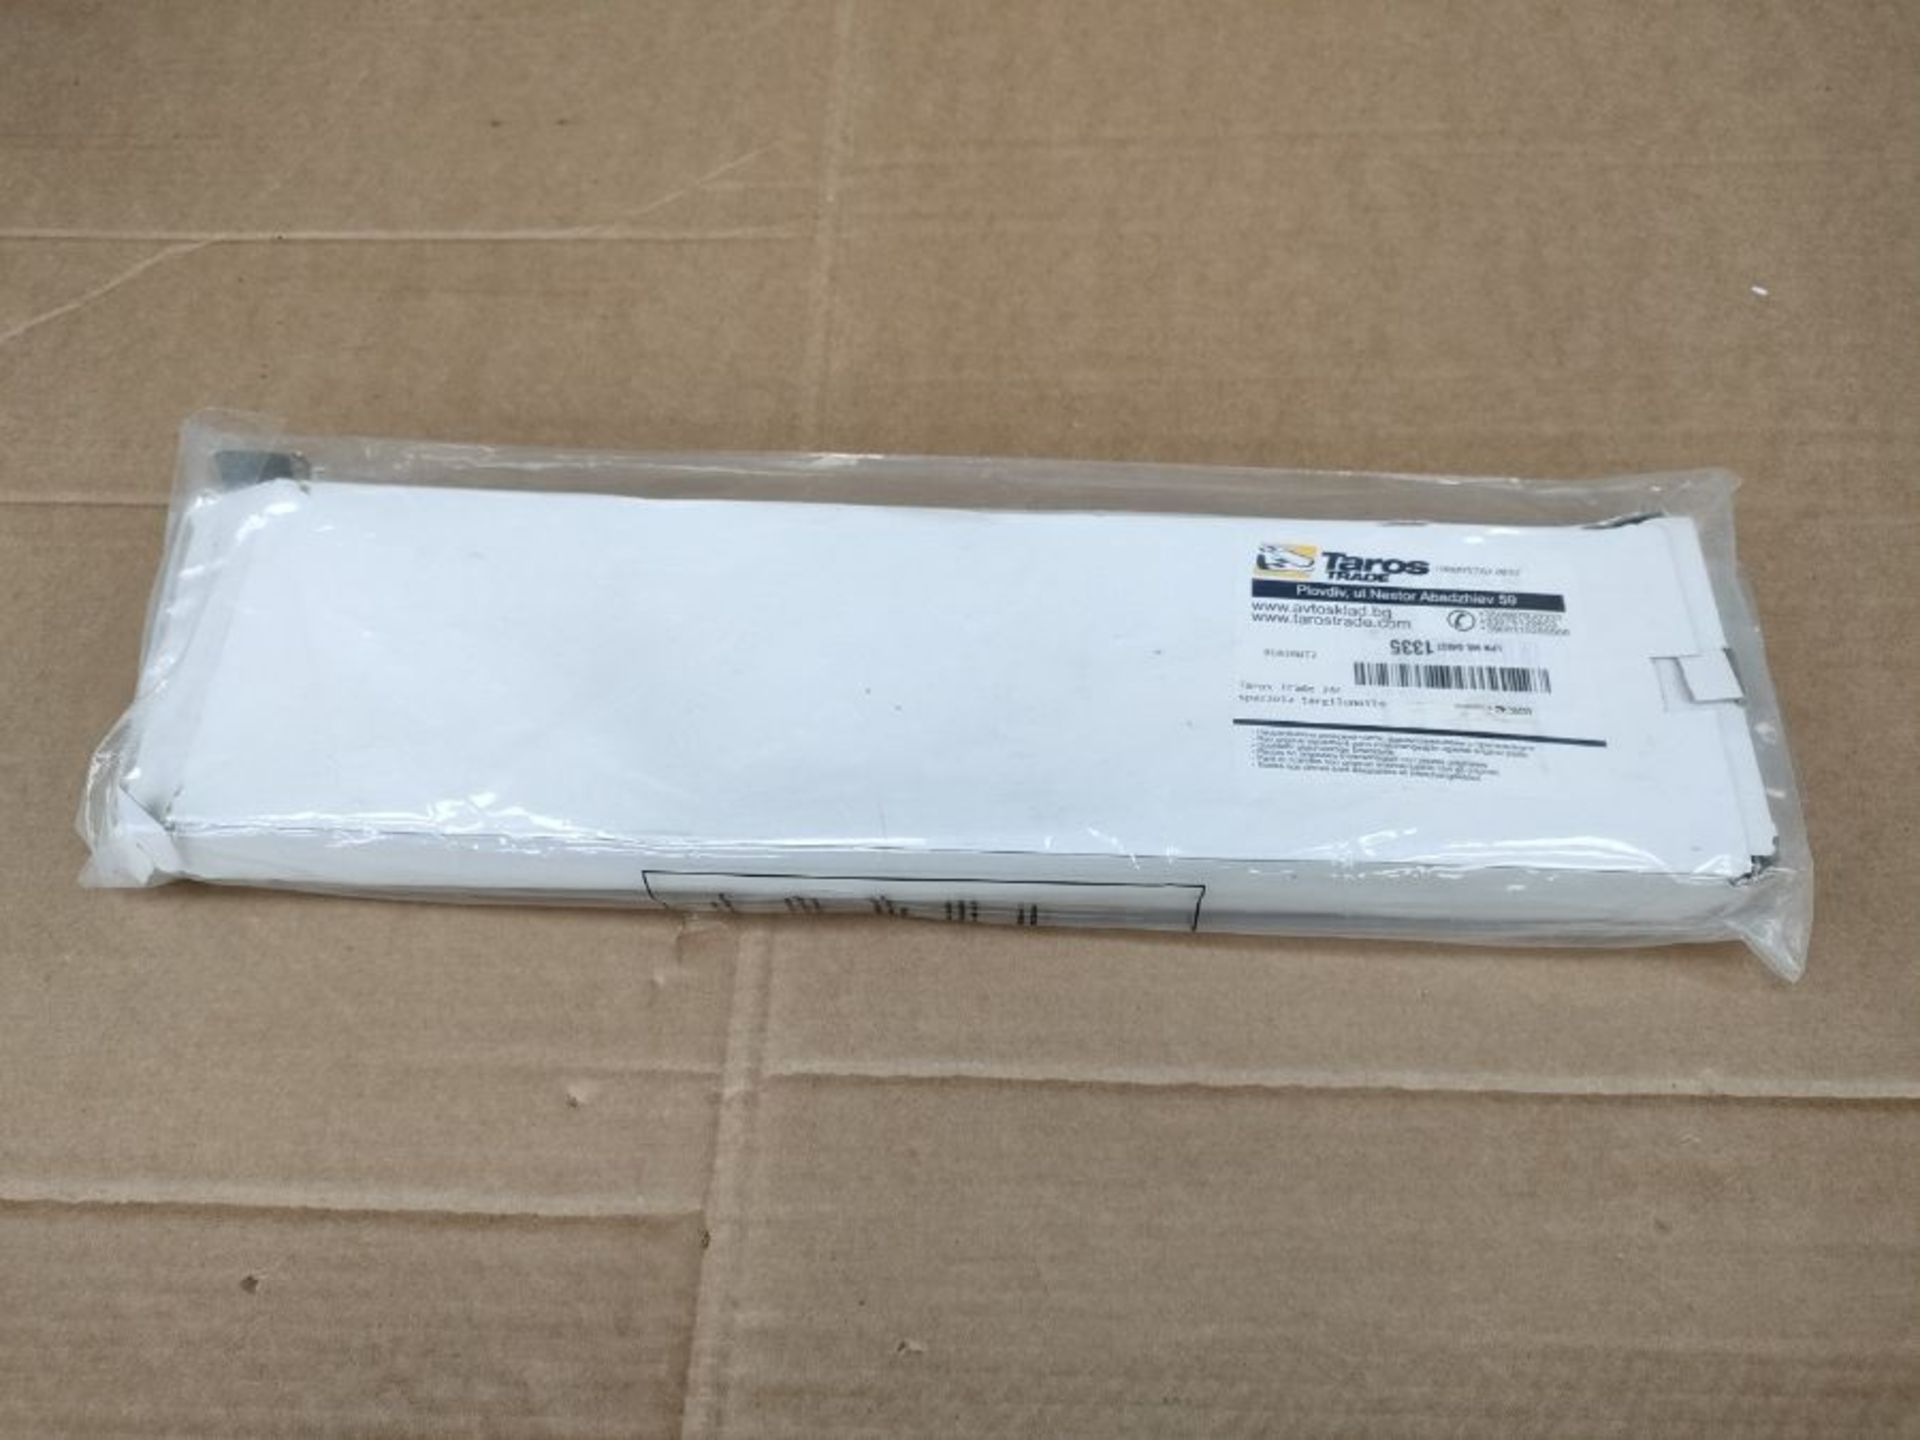 TarosTrade 244-0225-N-82514 Rear Wiper Arm And Blade Set 305 Mm For Cars Made In Franc - Image 2 of 3